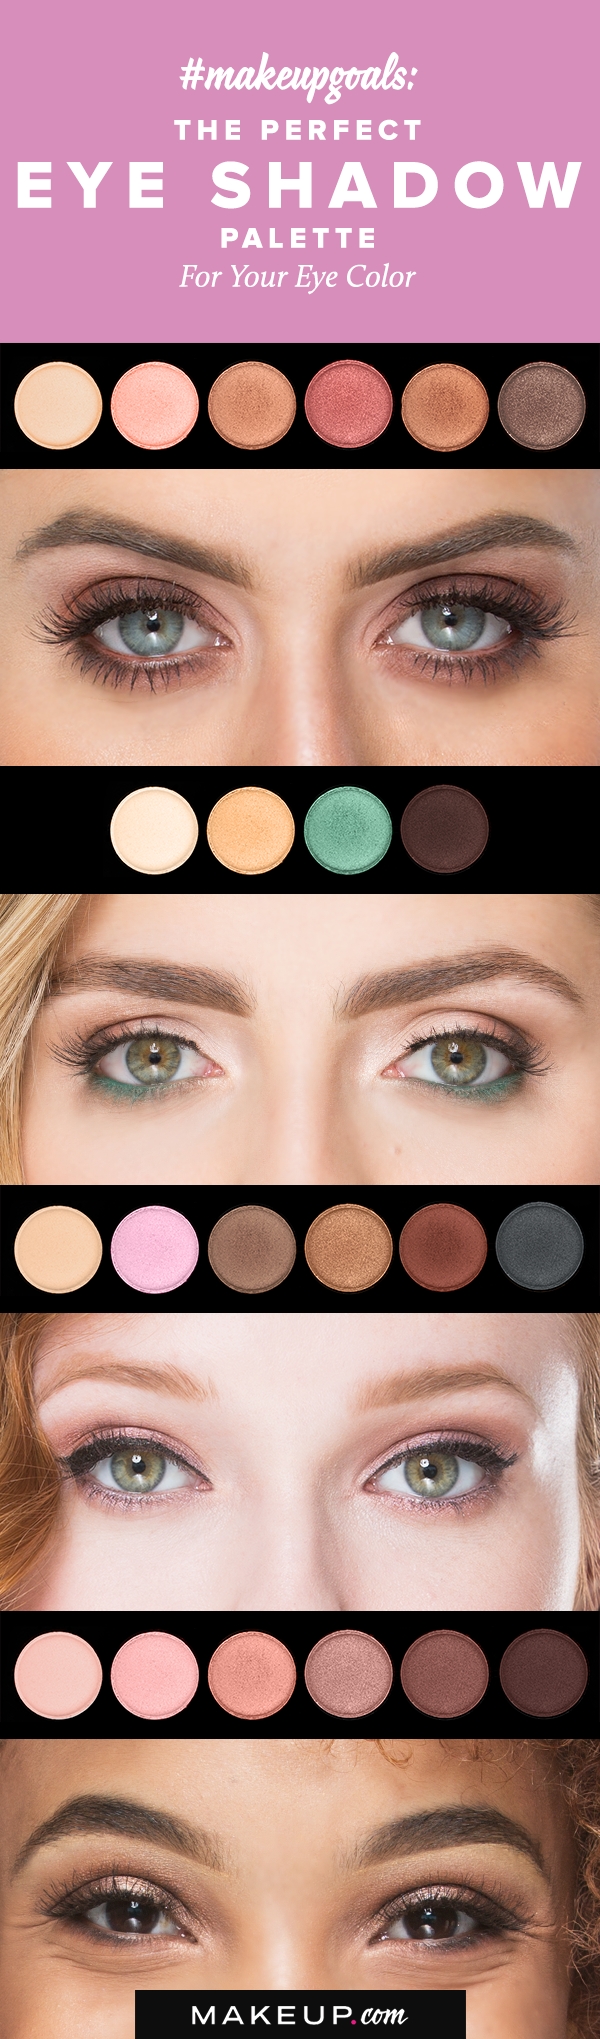 The Best Eyeshadow Palette For Your Eye Color | Best pertaining to Best Makeup Palettes For Green Eyes